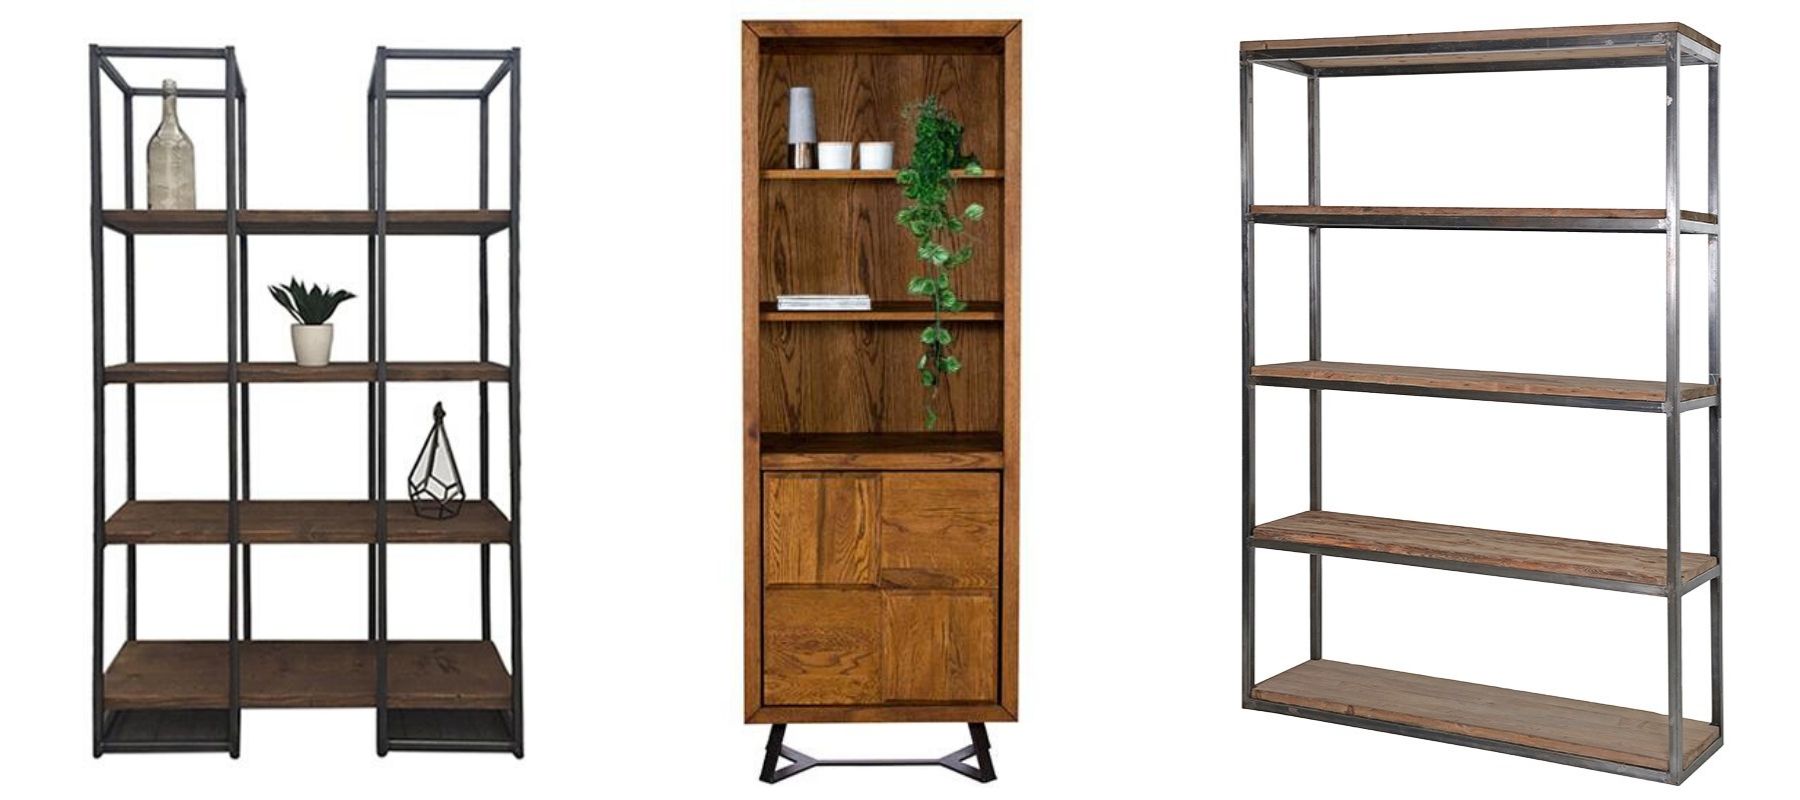 Three styles of industrial office storage, including metal bookcases